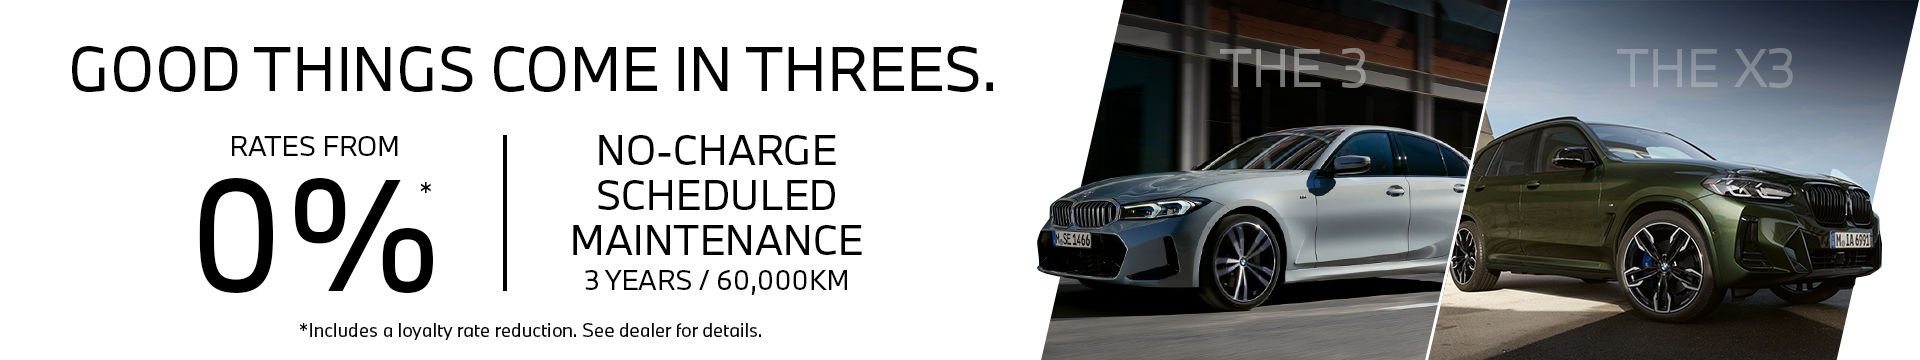 BMW - COMES IN THREES (VRP)